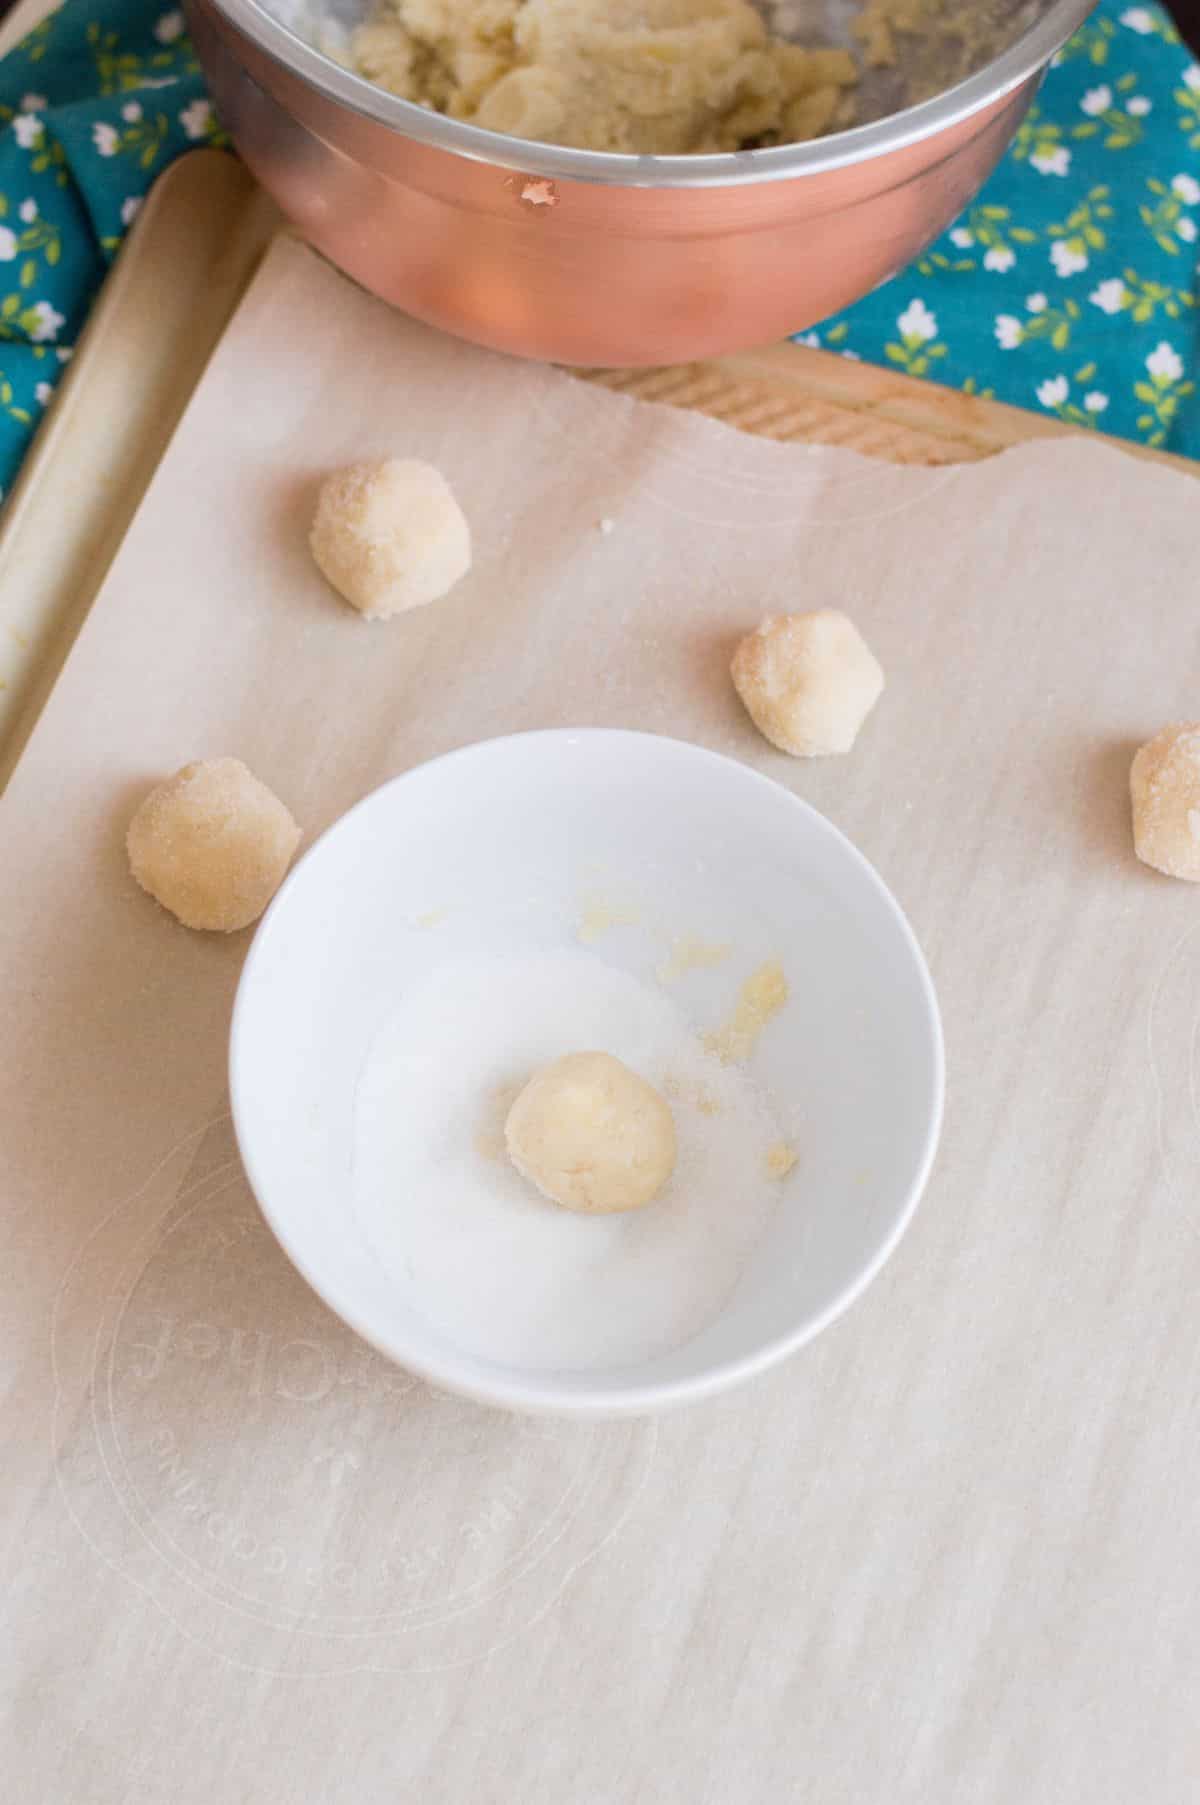 dough balls are rolled in granulated sugar.